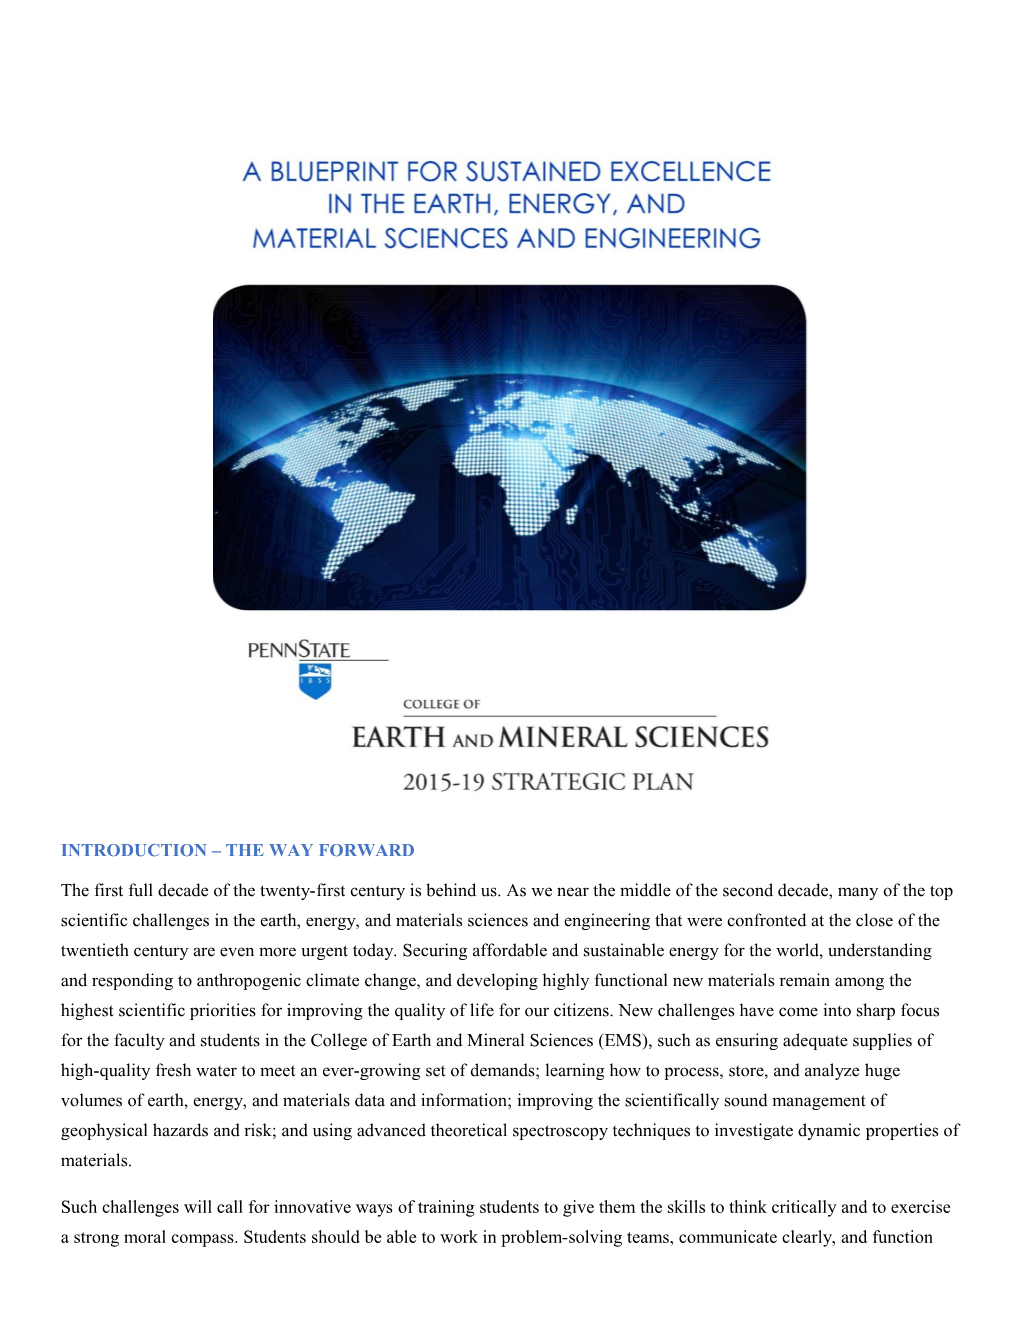 Penn State College of Earth and Mineral Sciences Strategic Plan